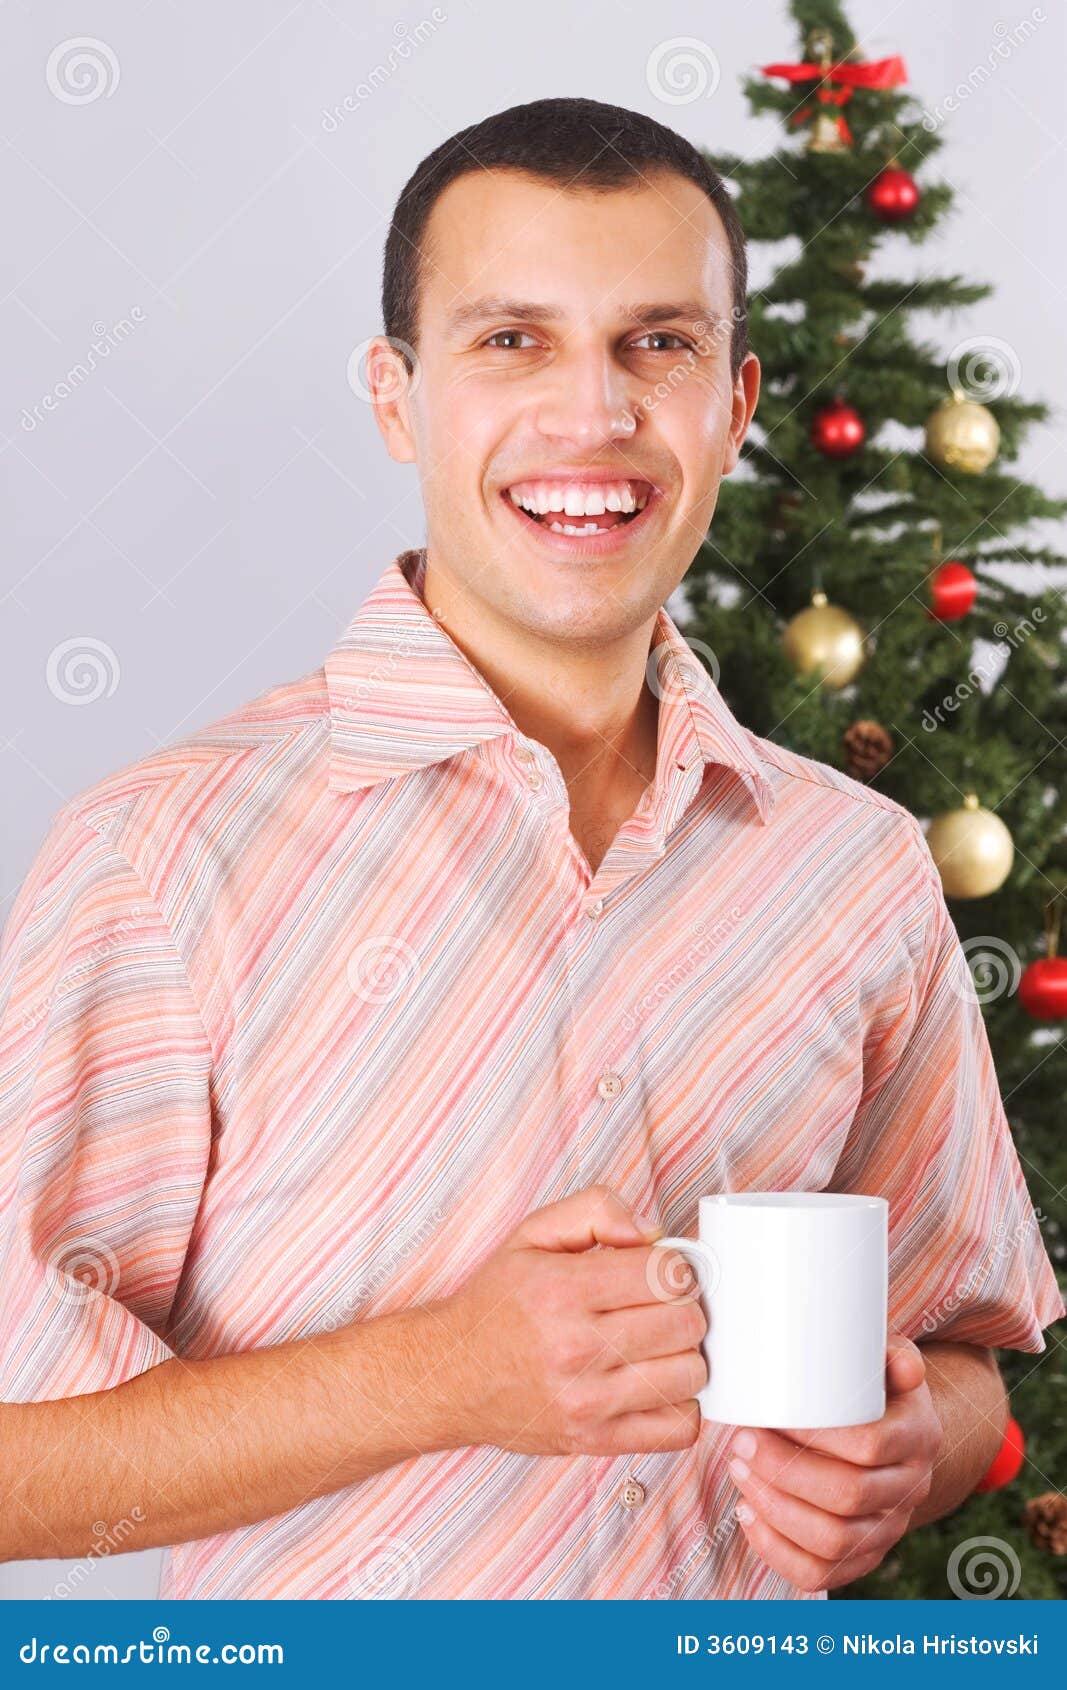 Young Man Holding Cup With Tea Stock Photos - Image: 3609143